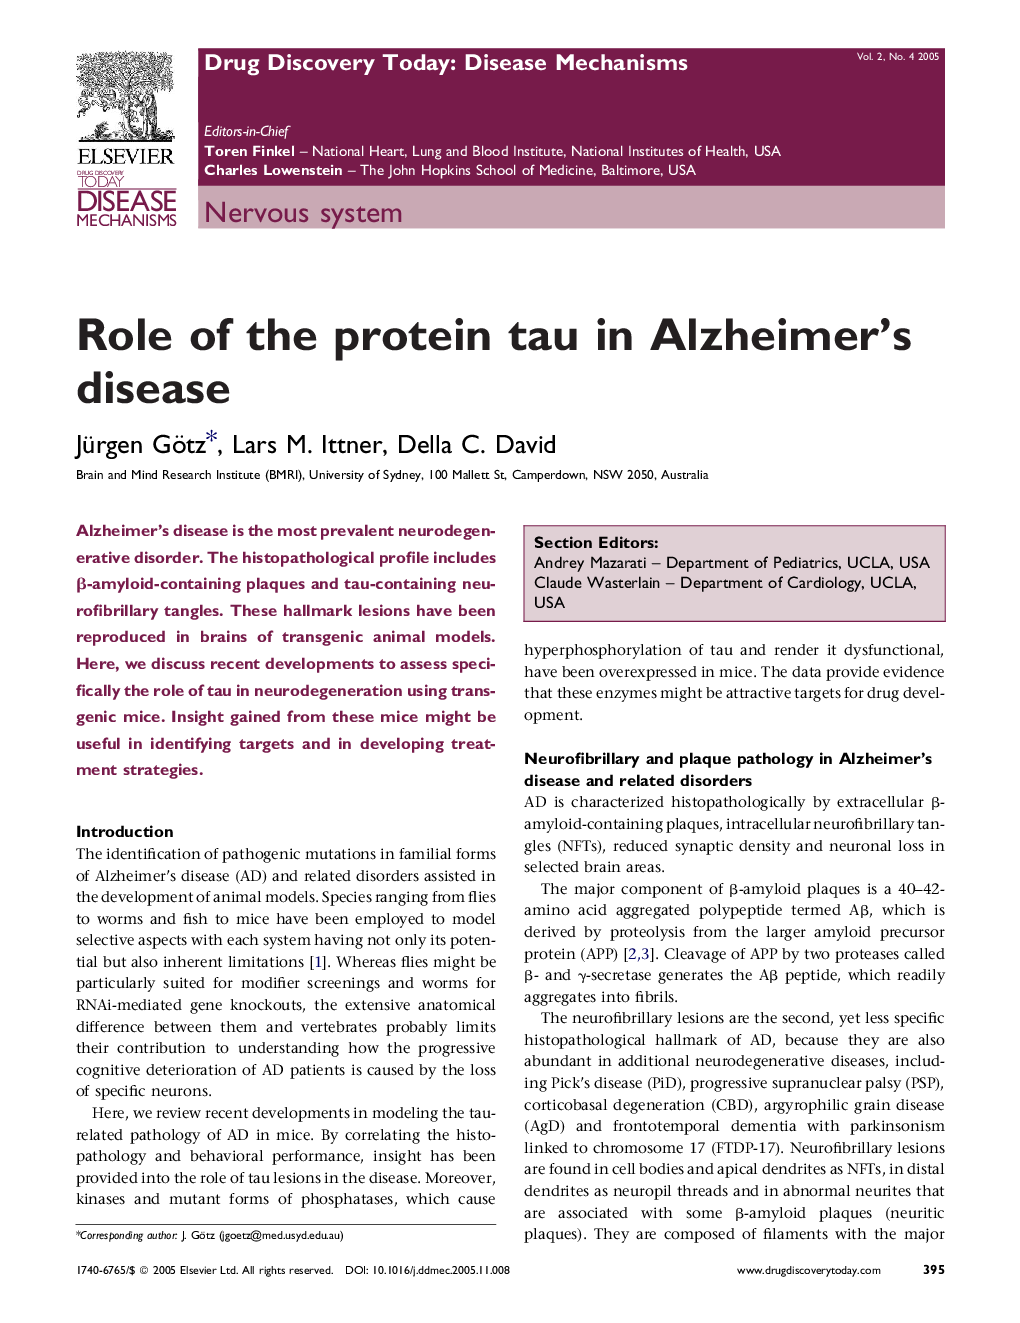 Role of the protein tau in Alzheimer's disease